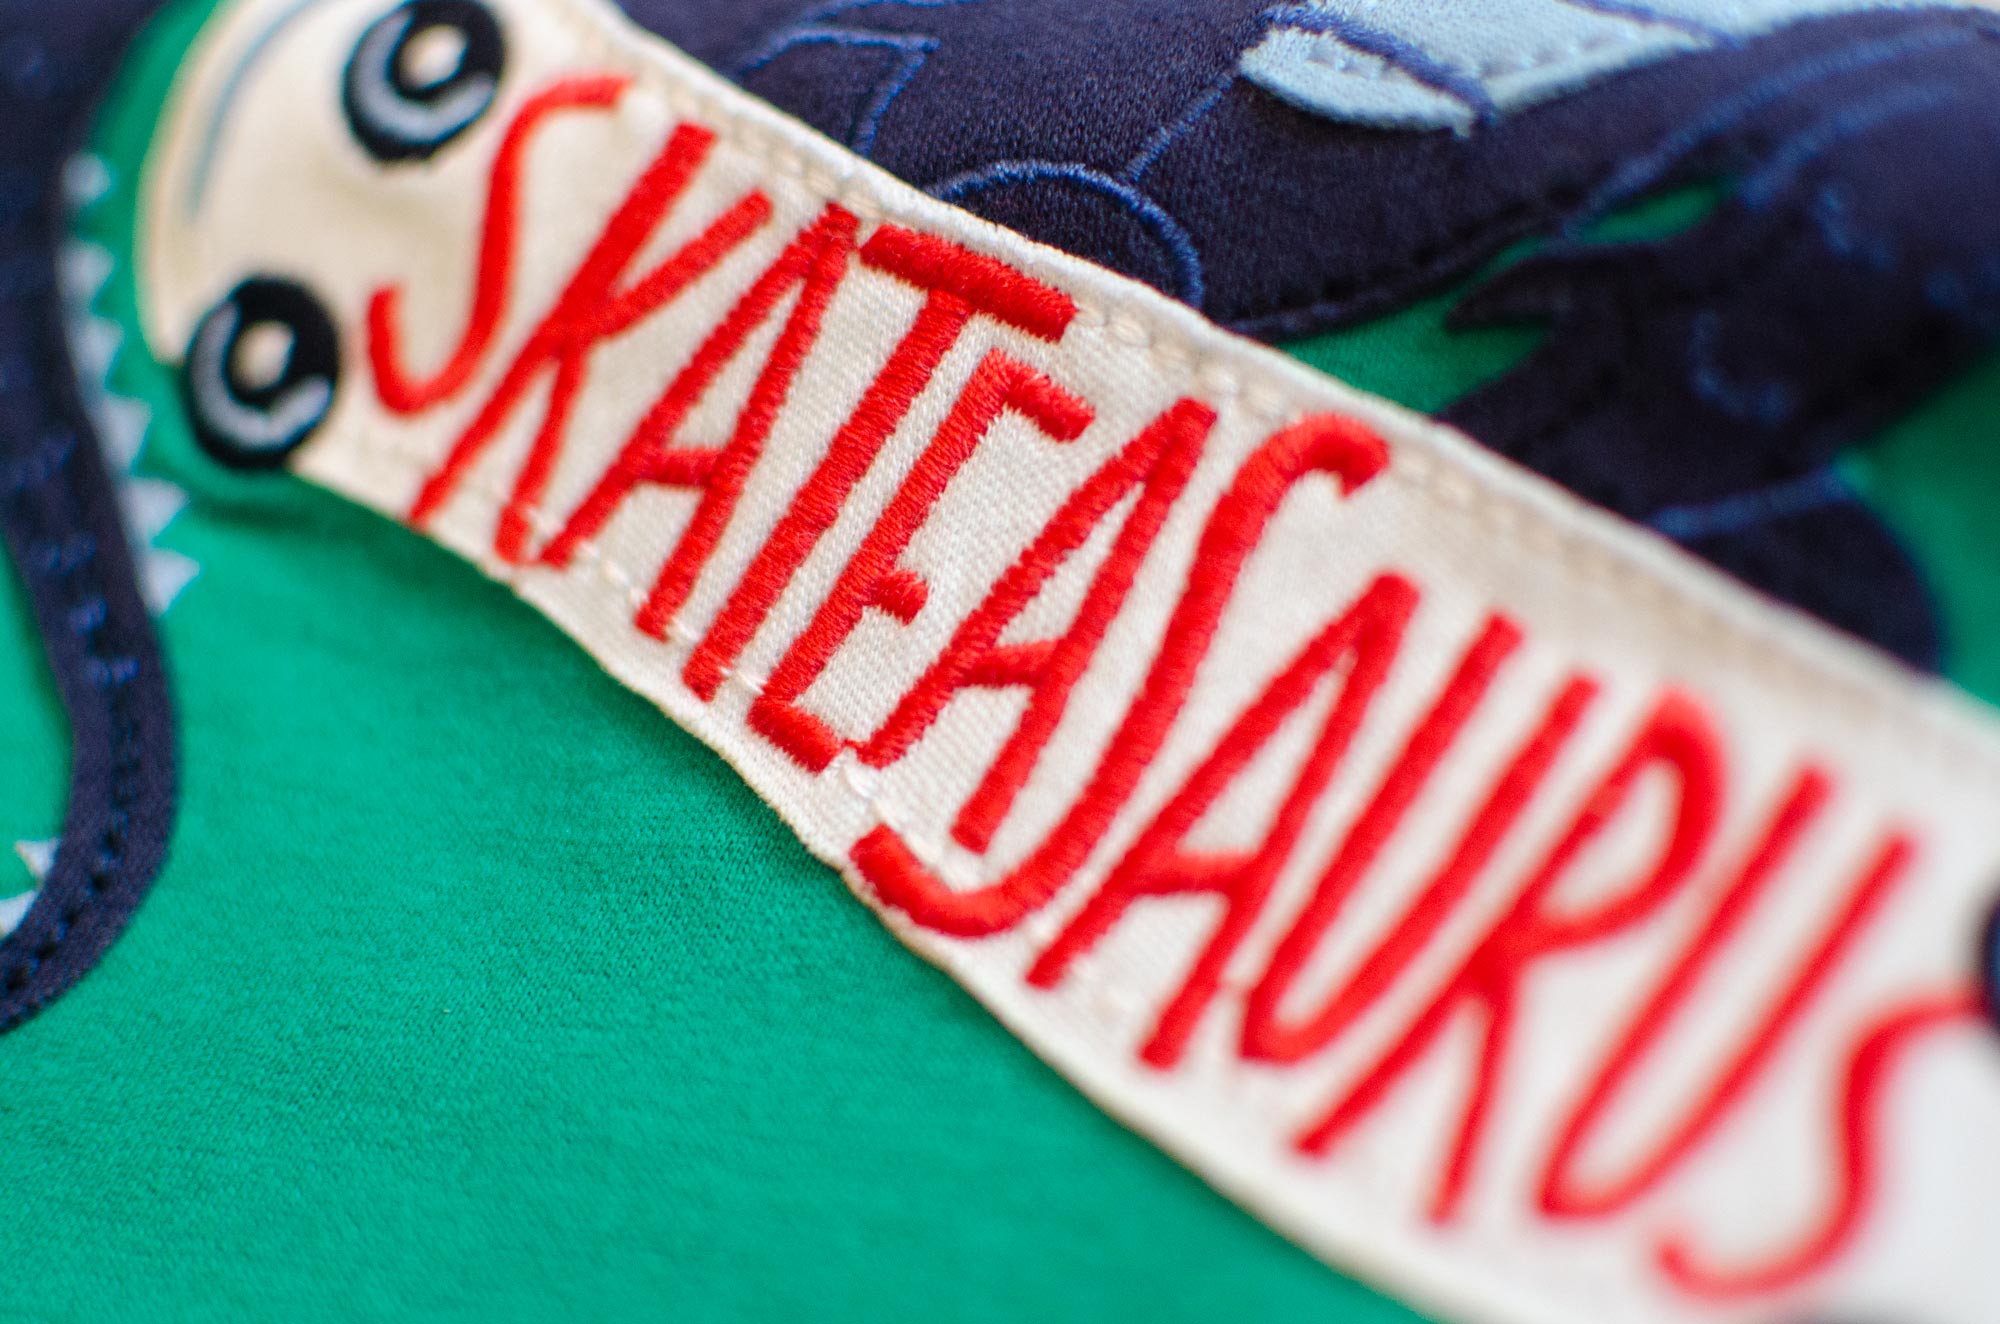 Skateasaurus embroidered letters for Joules by Elly Jahnz